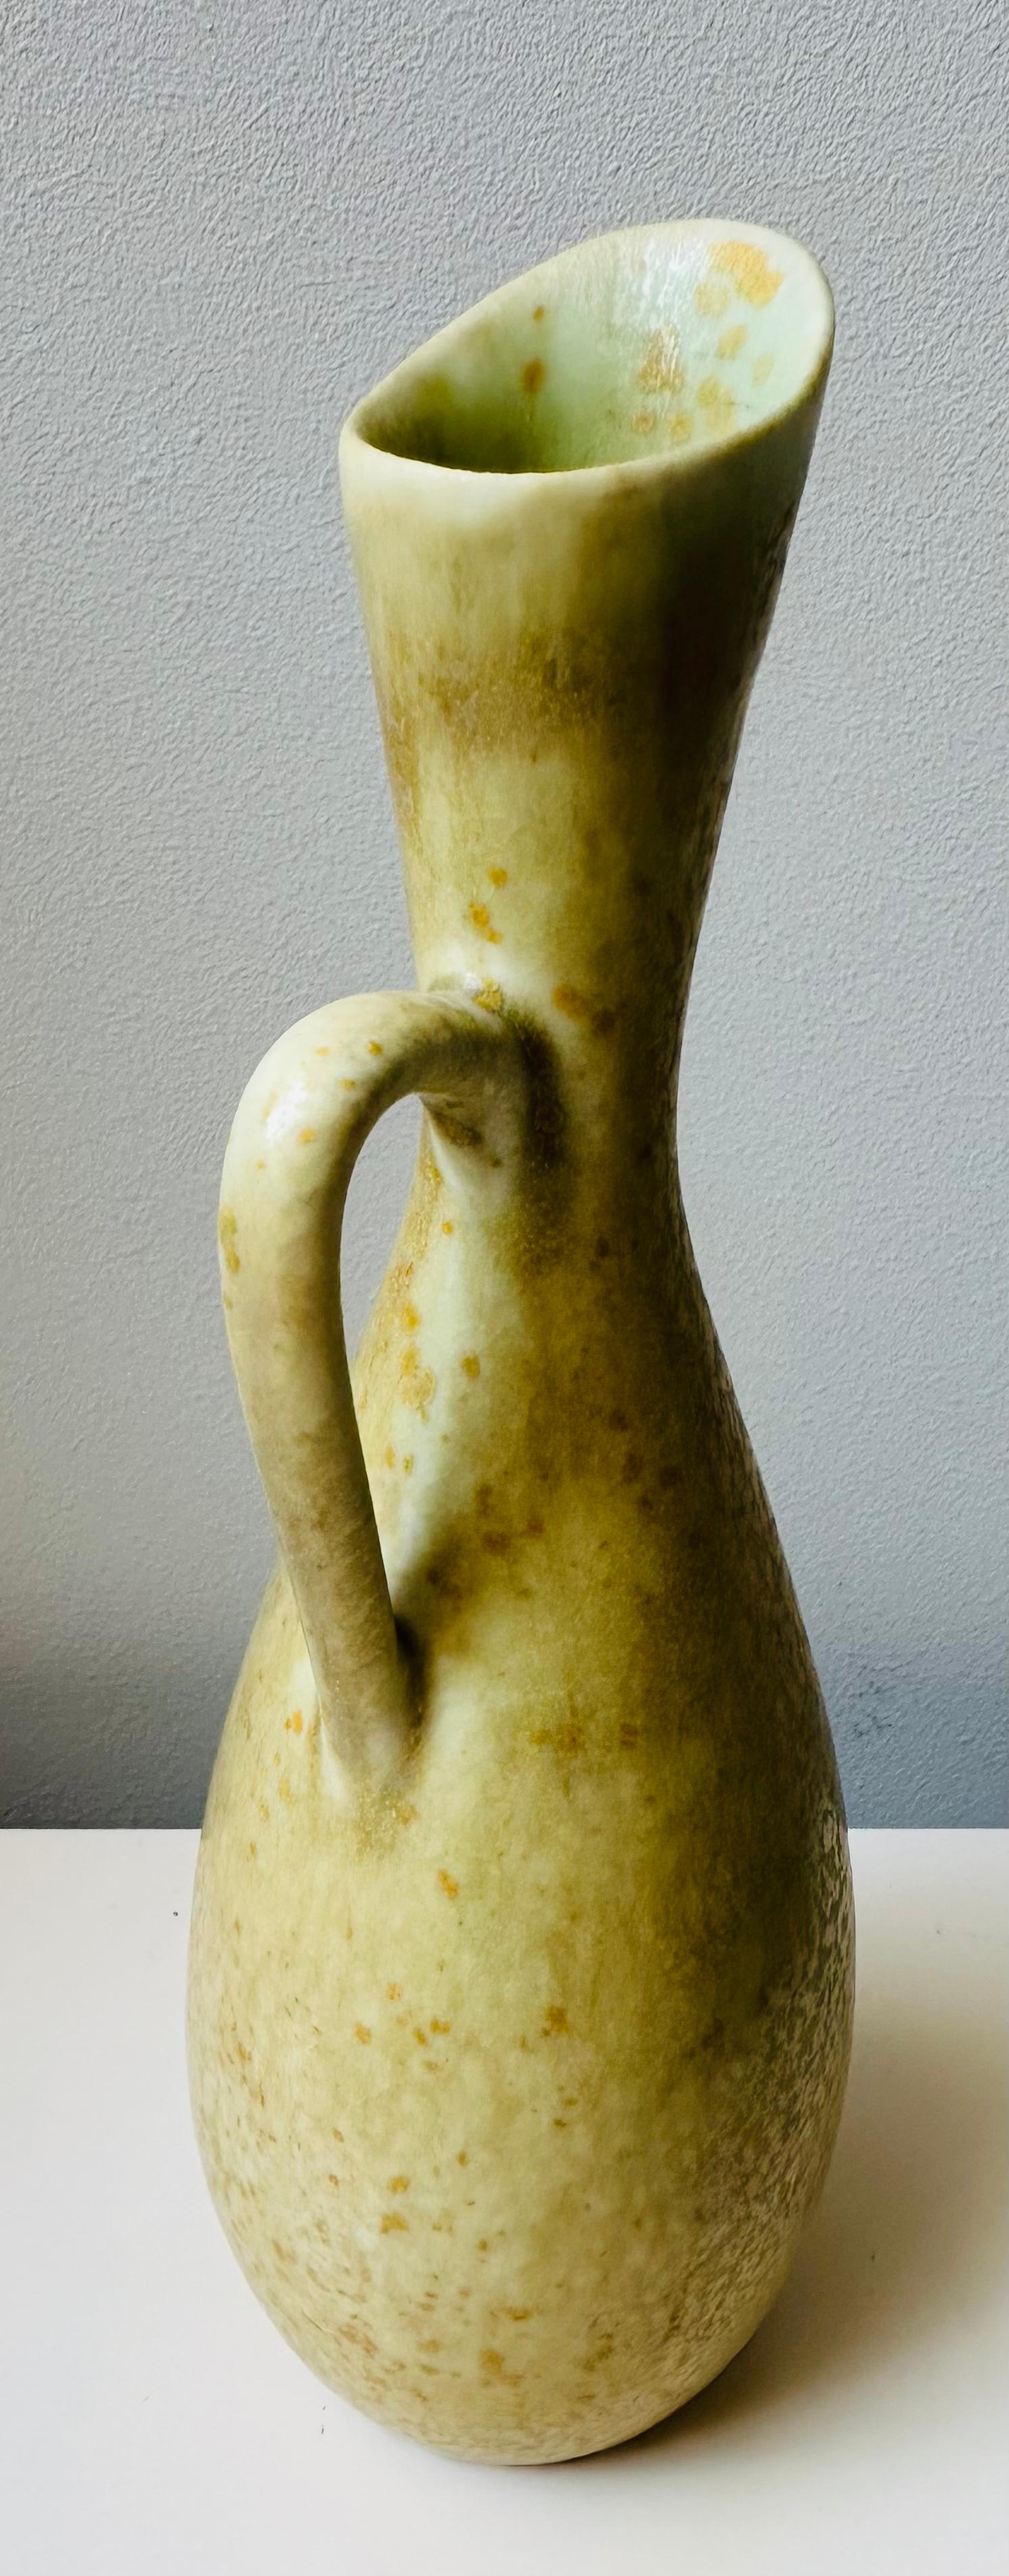 1950s Swedish Single Handled Jug by Carl-Harry Stålhane for Rörstrand Factory In Good Condition For Sale In London, GB